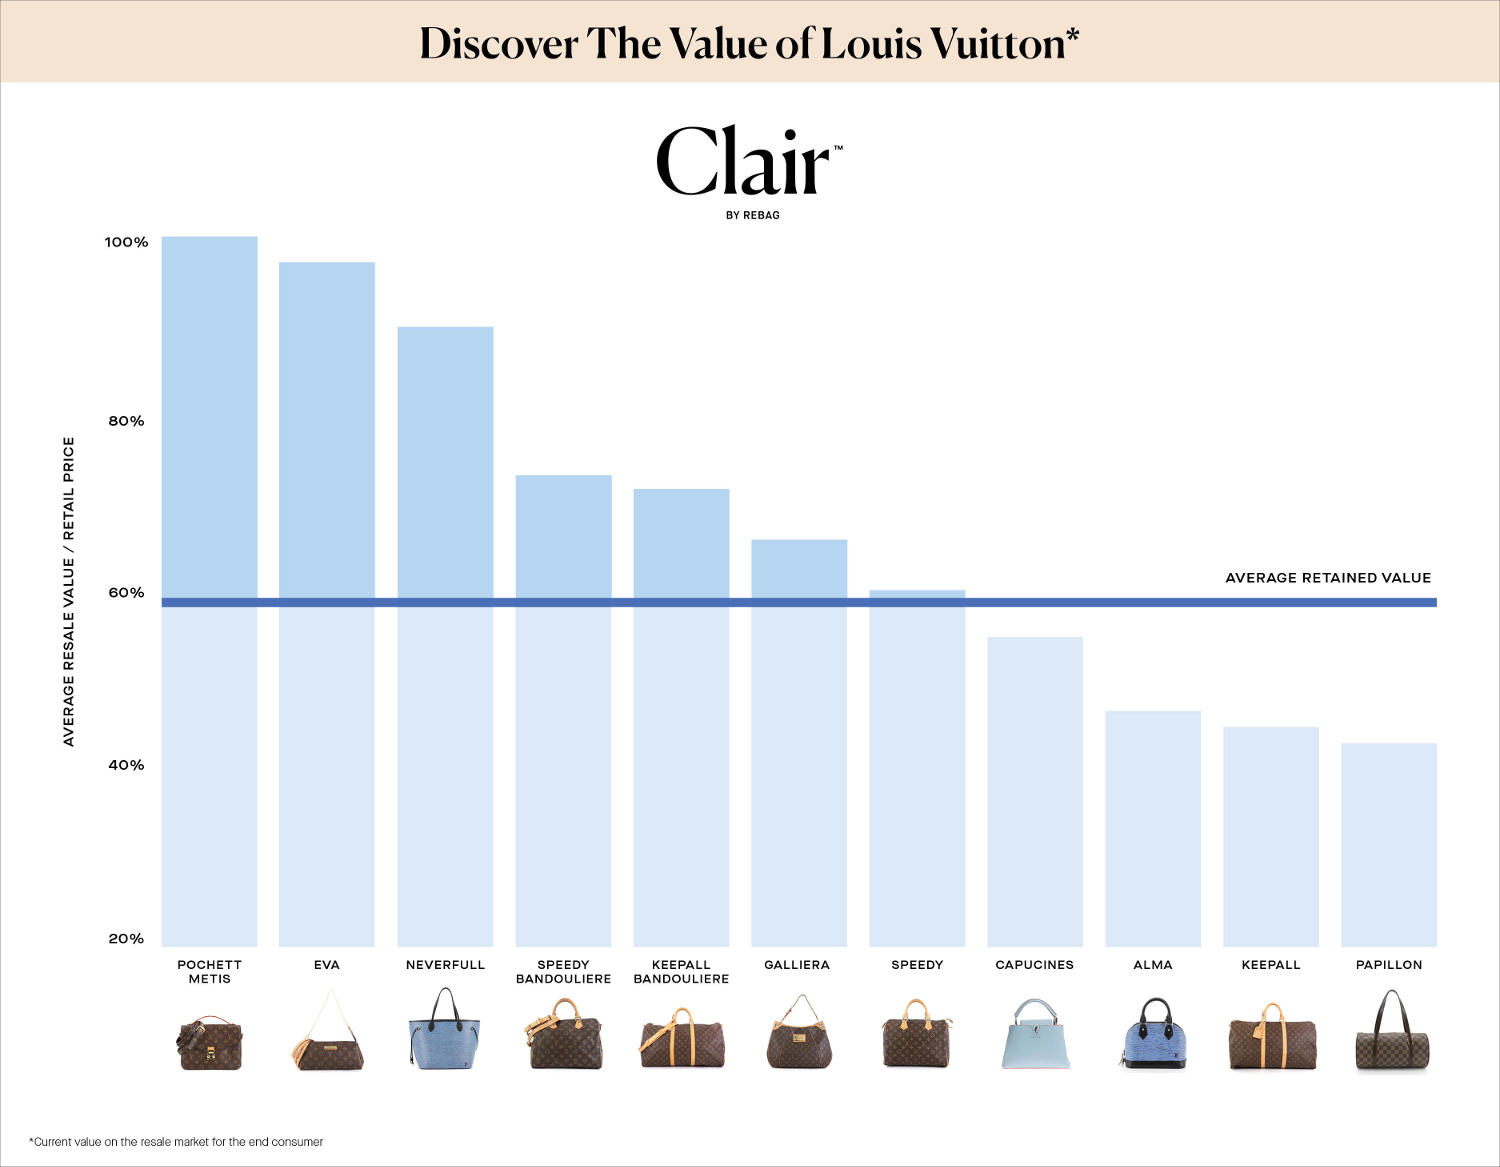 Louis Vuitton is a luxury brand that really retains resale value